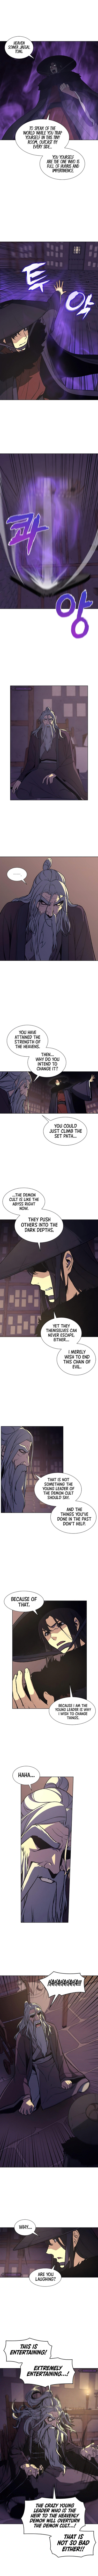 I Reincarnated As The Crazed Heir - Chapter 8 Page 8